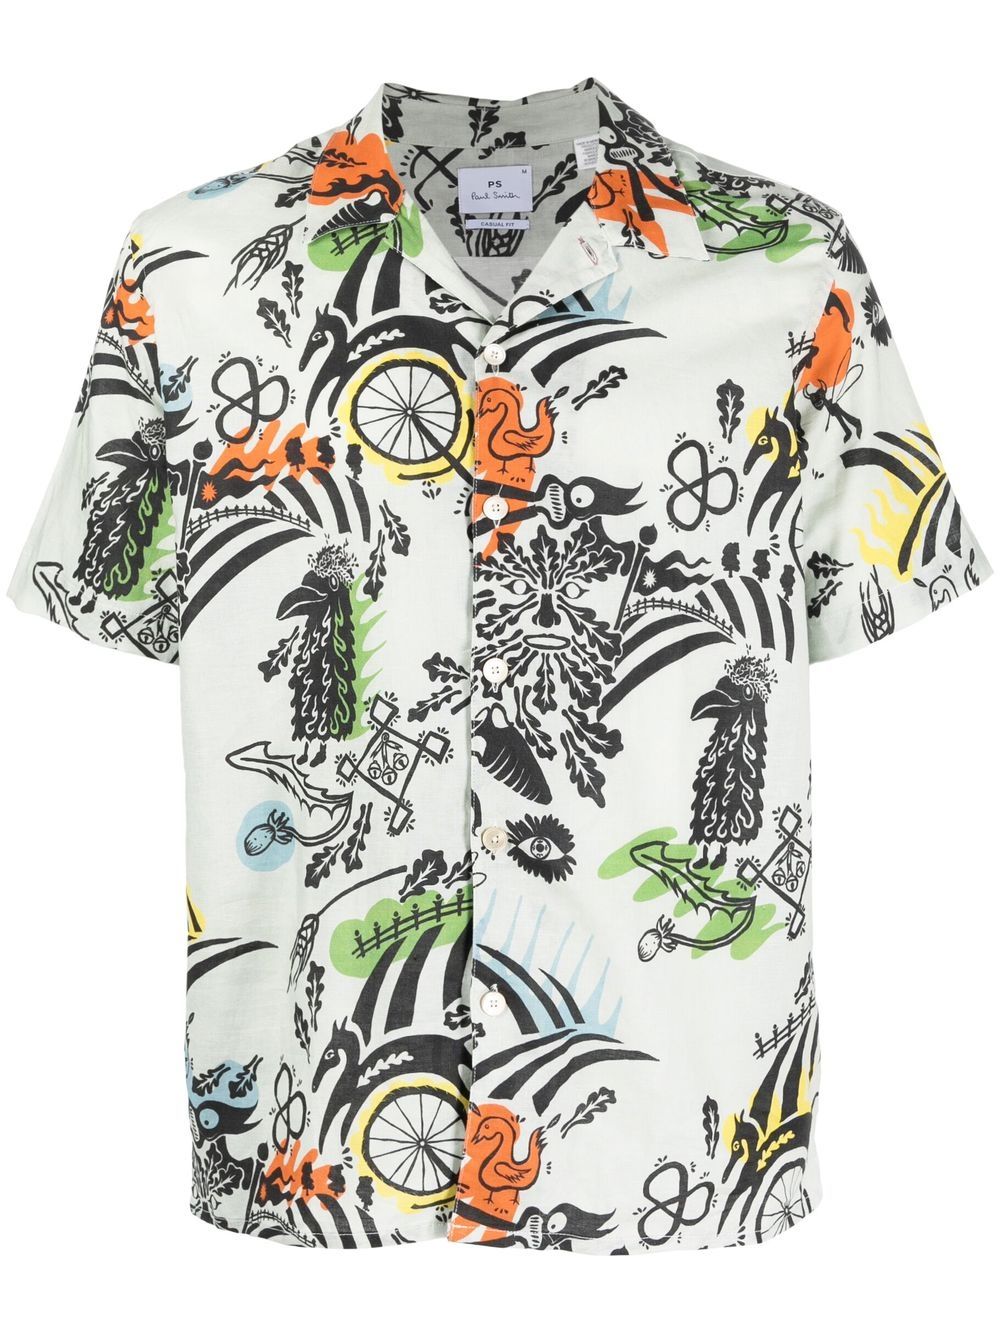 PS BY PAUL SMITH GRAPHIC-PRINT CUBAN SHIRT